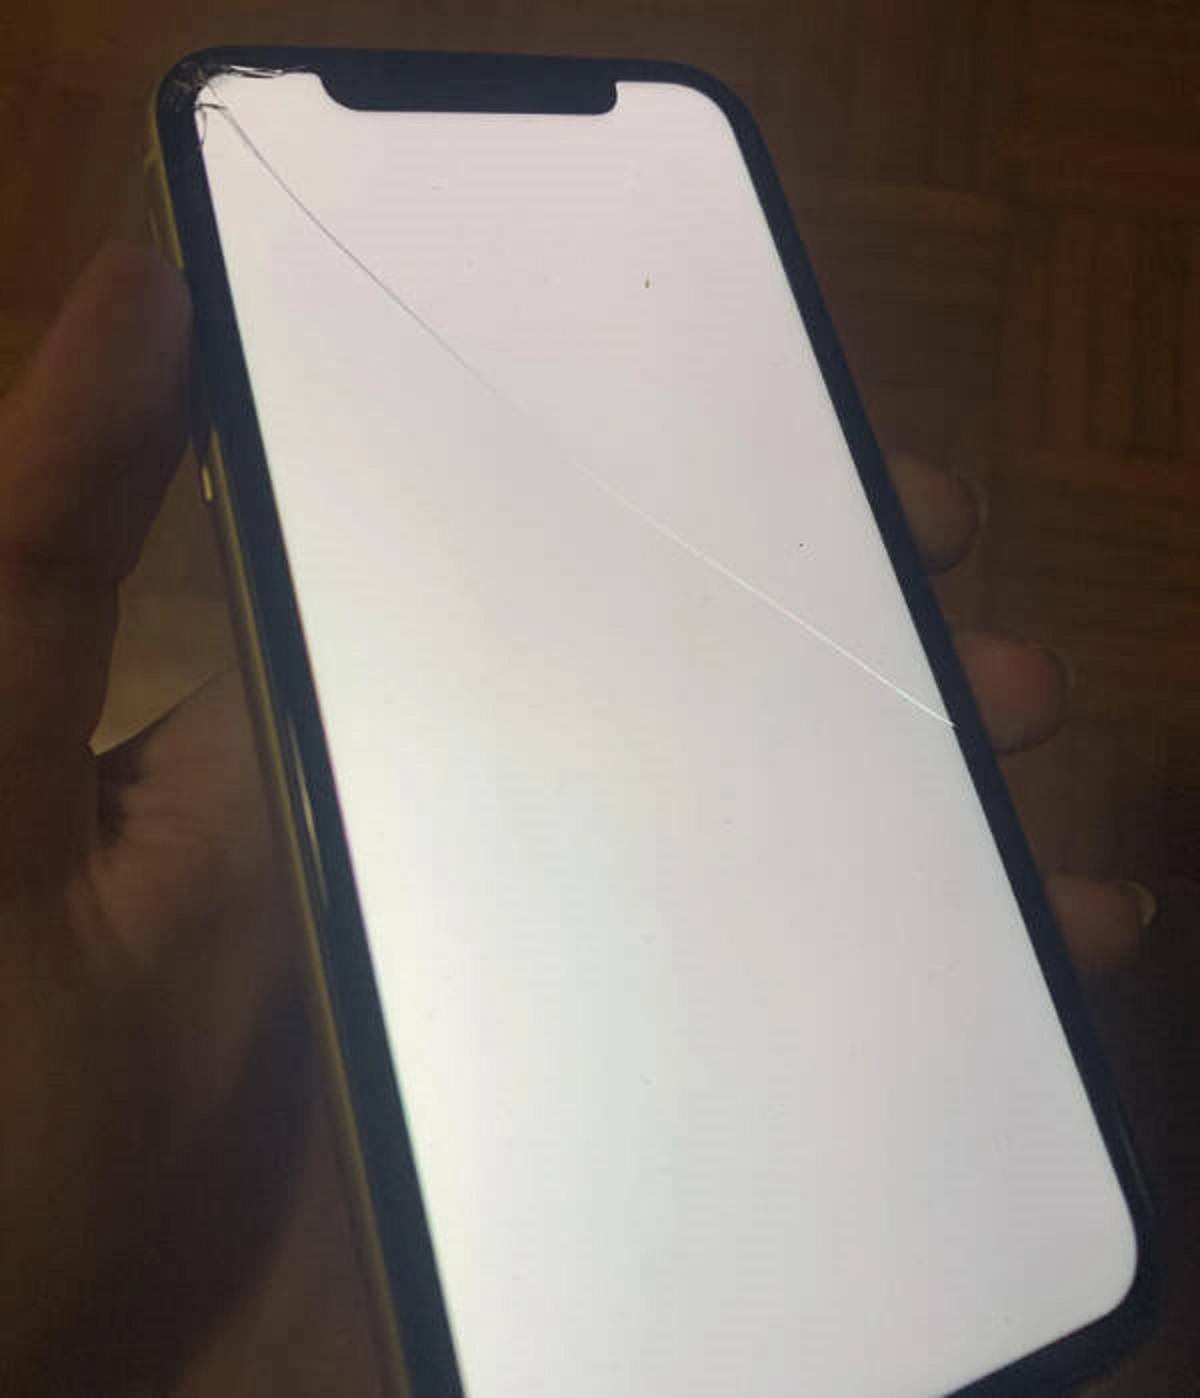 “Got a new phone for Christmas. Was a bit too excited, it fell off my pocket and the screen broke (it lasted less than 2 hours)”